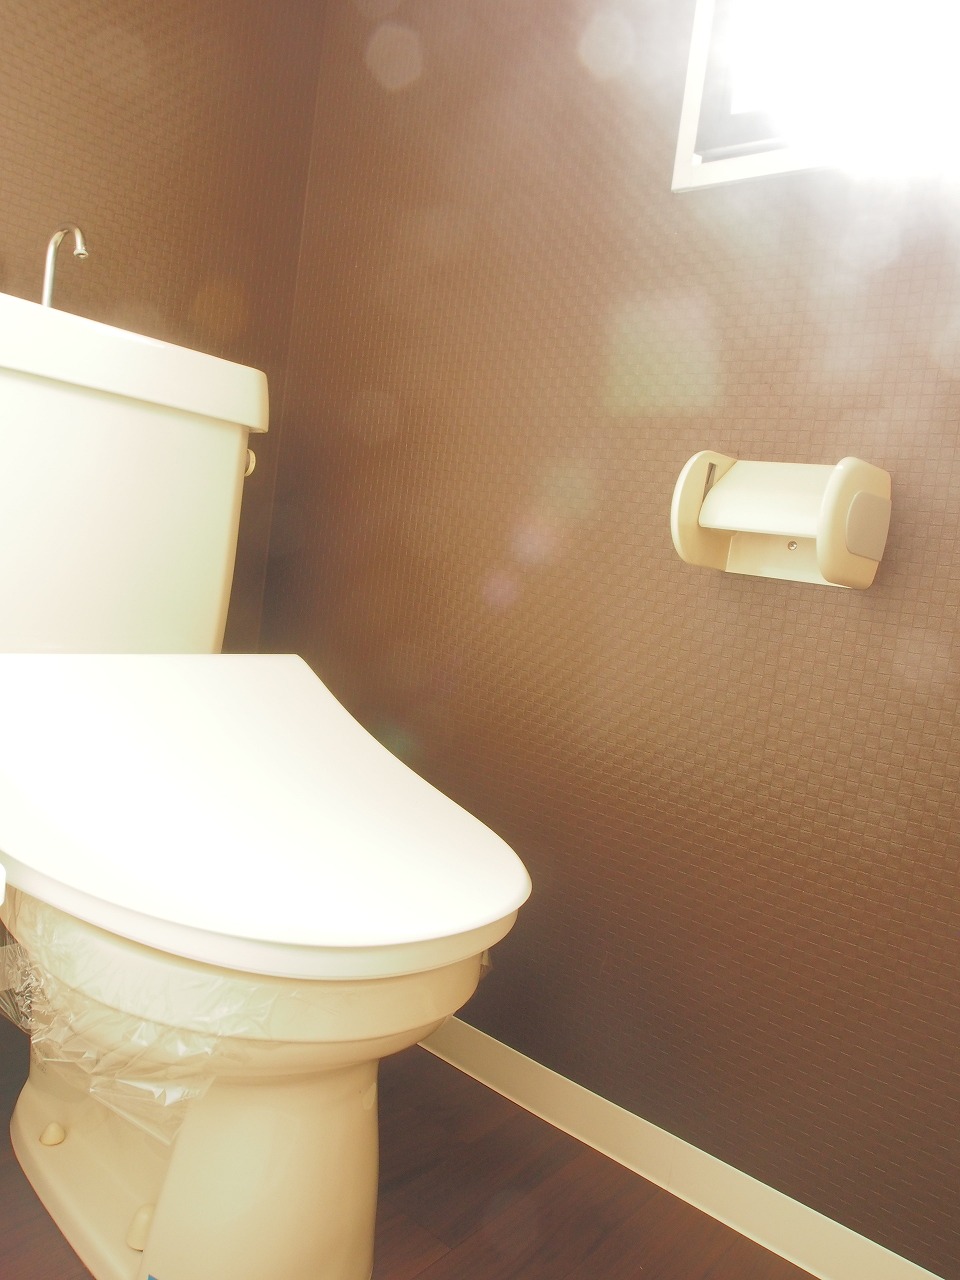 Toilet. Ventilation is also good bright because there is a small window in the toilet.